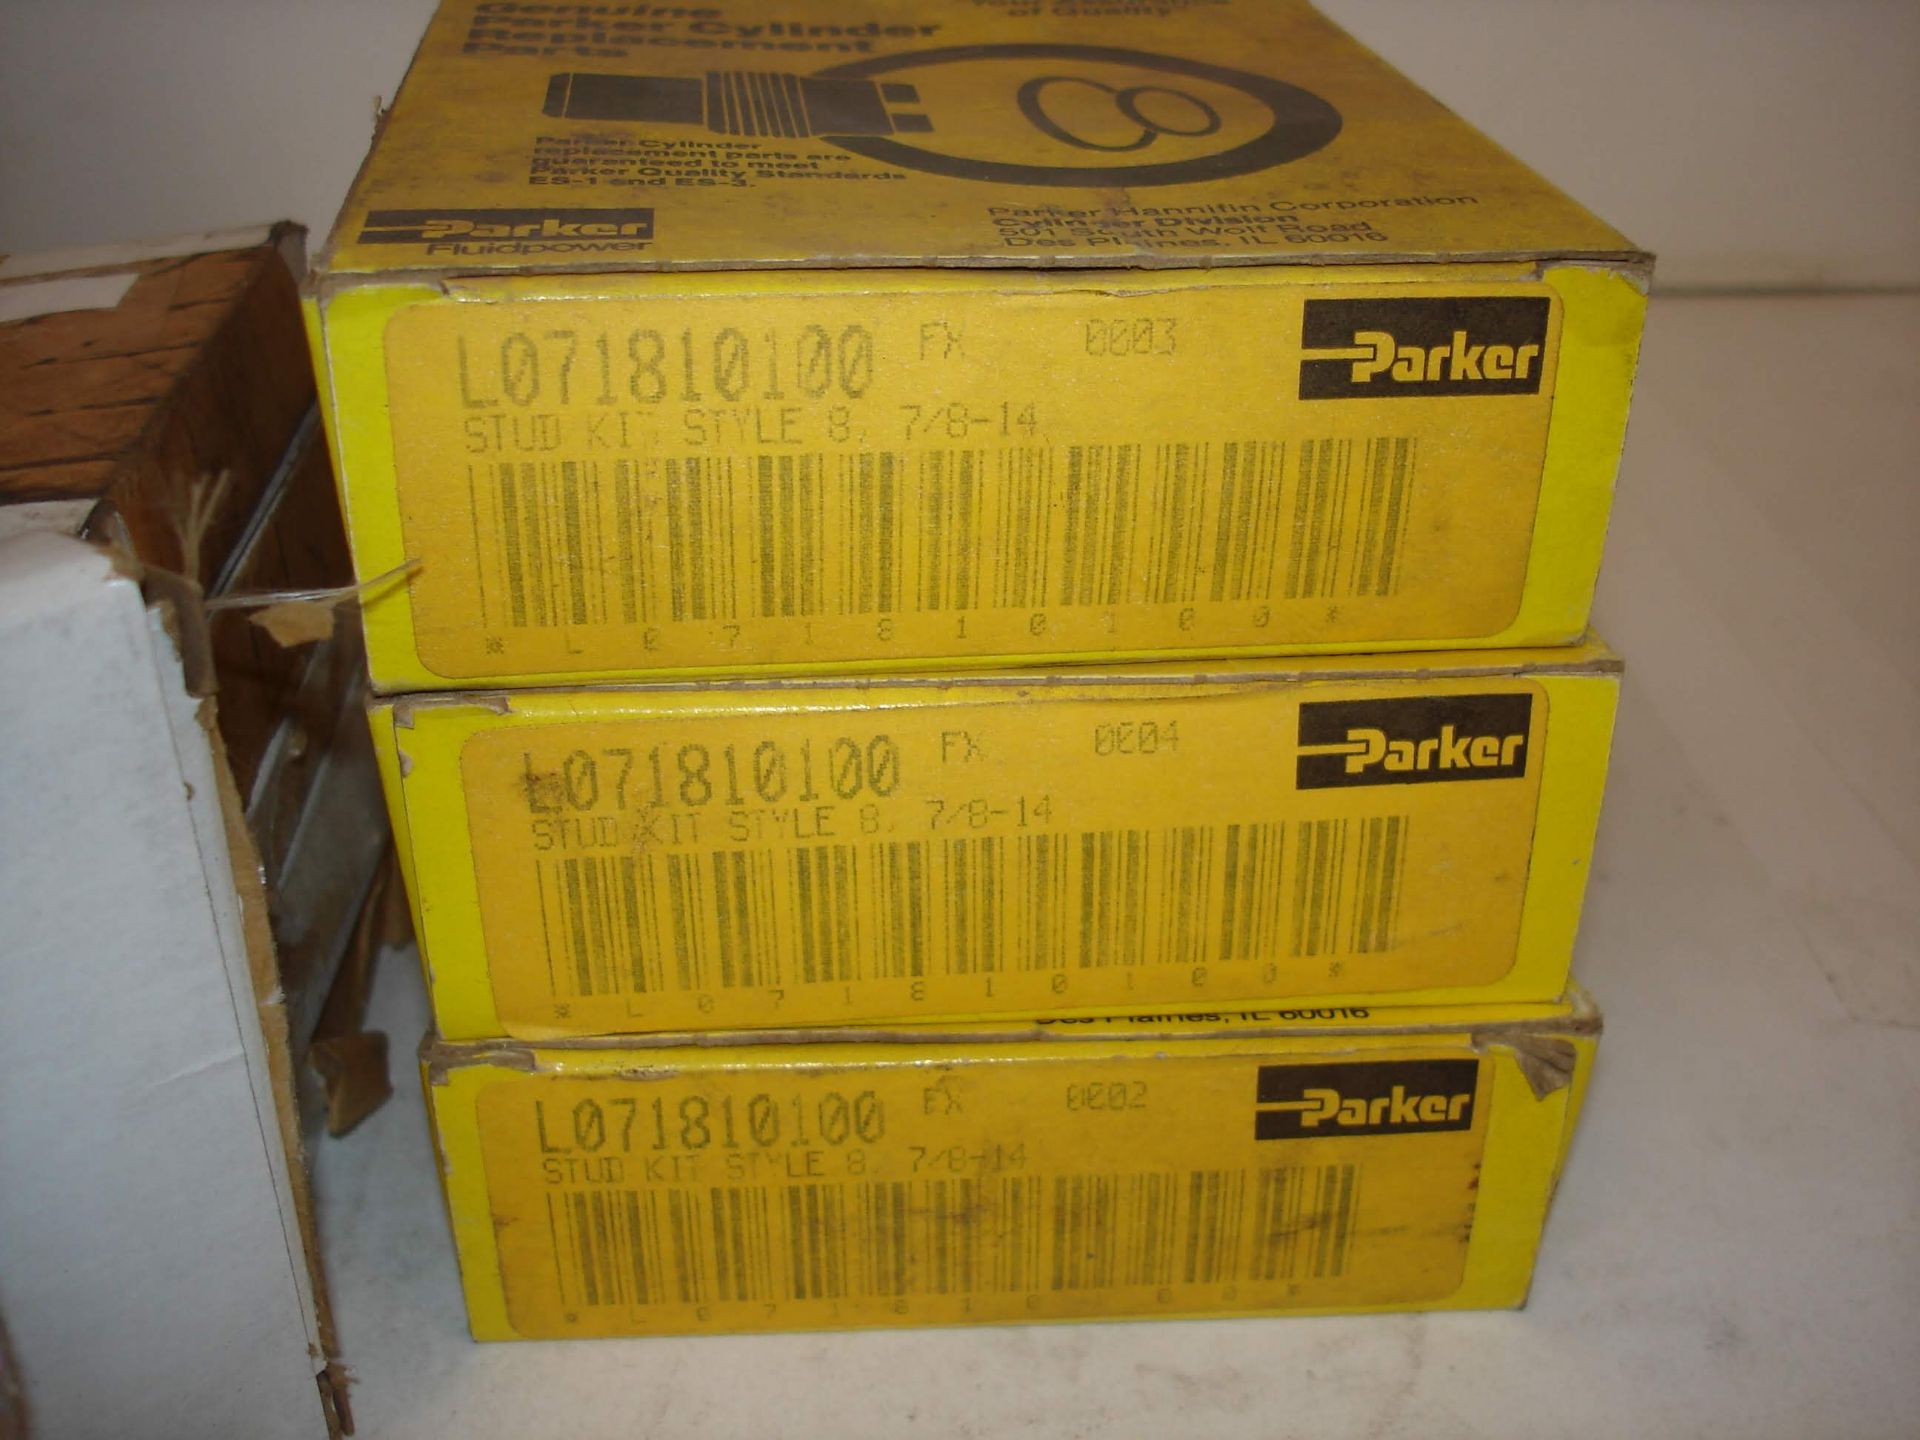 (16) NEW GARLOCK KLOZURE OIL SEAL 250D3-2918, AIR ENGINEERING, PARKER L071810100 (LOCATED AT: 1200 - Image 4 of 4